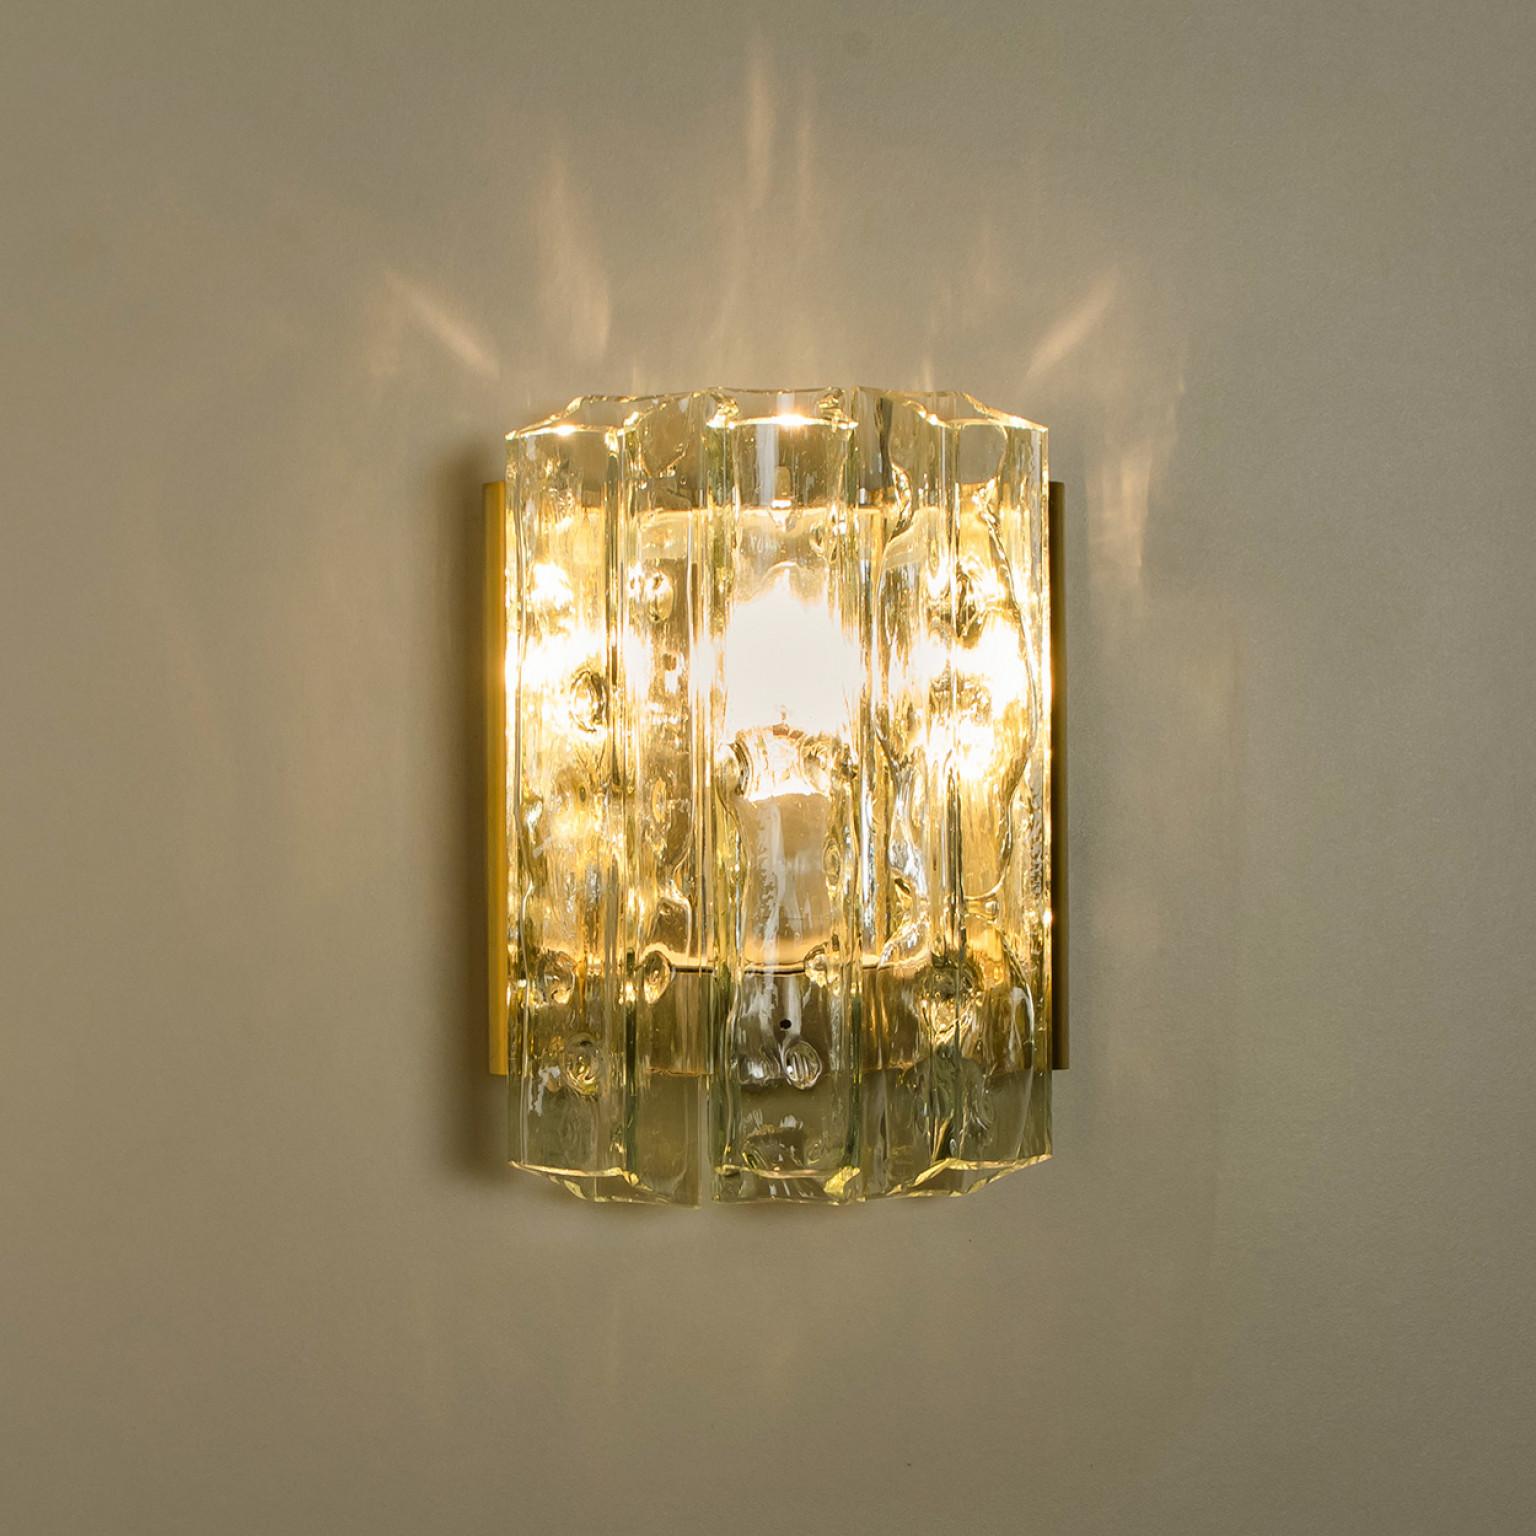 Pair of Faceted Tubes Wall Lights by Doria Leuchten, 1960s For Sale 4